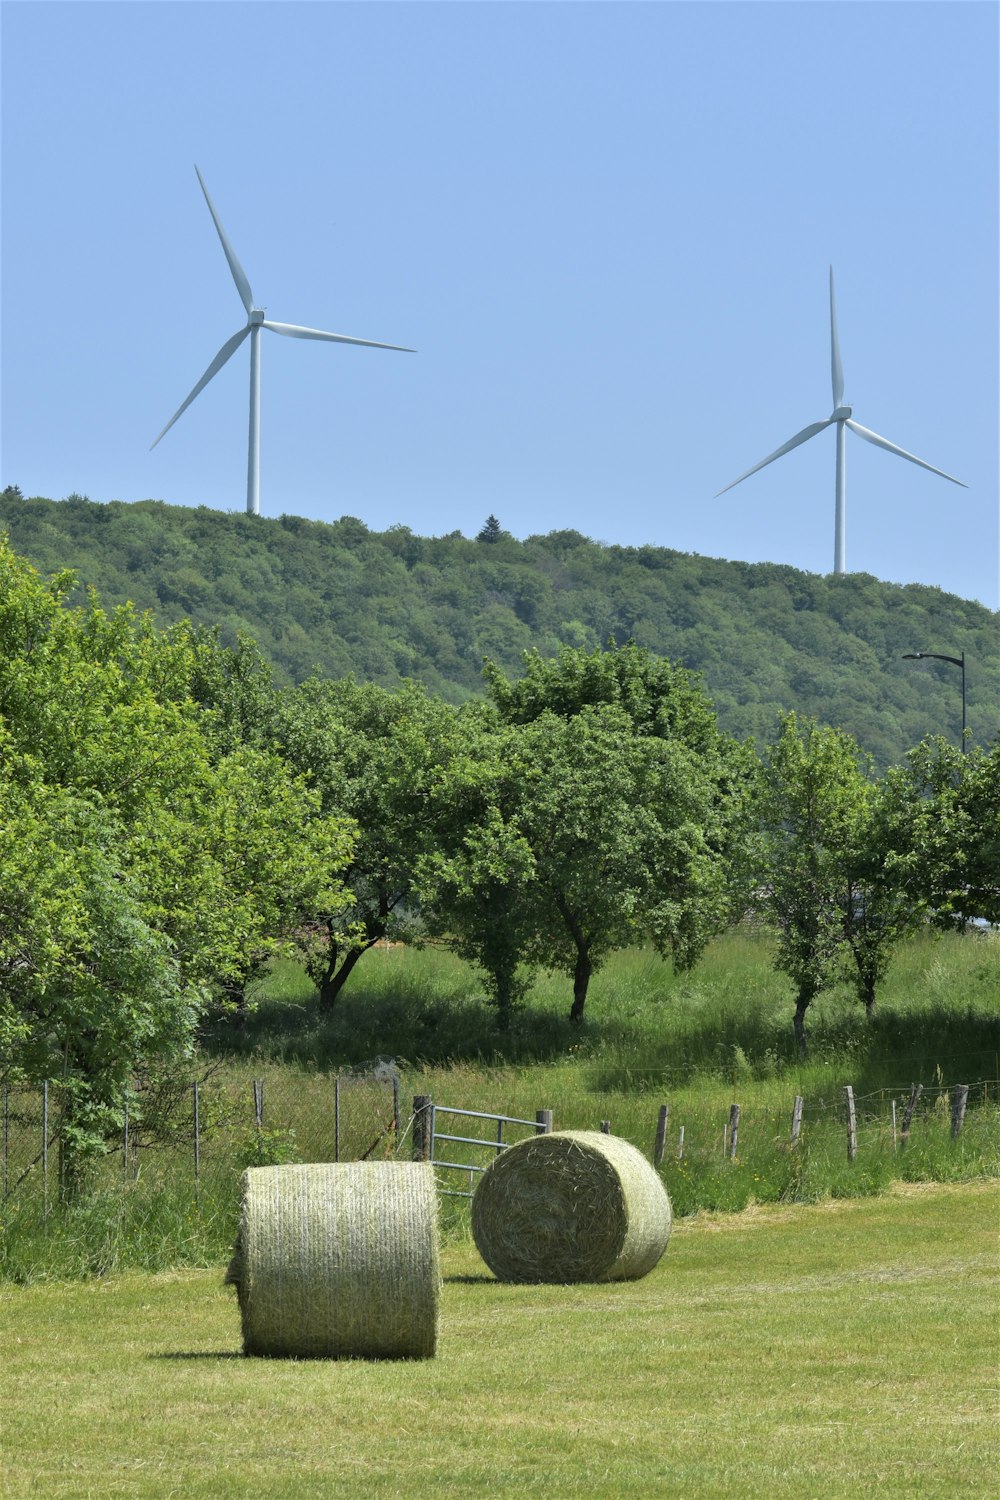 two bales of hay in a field with wind turbines in the background